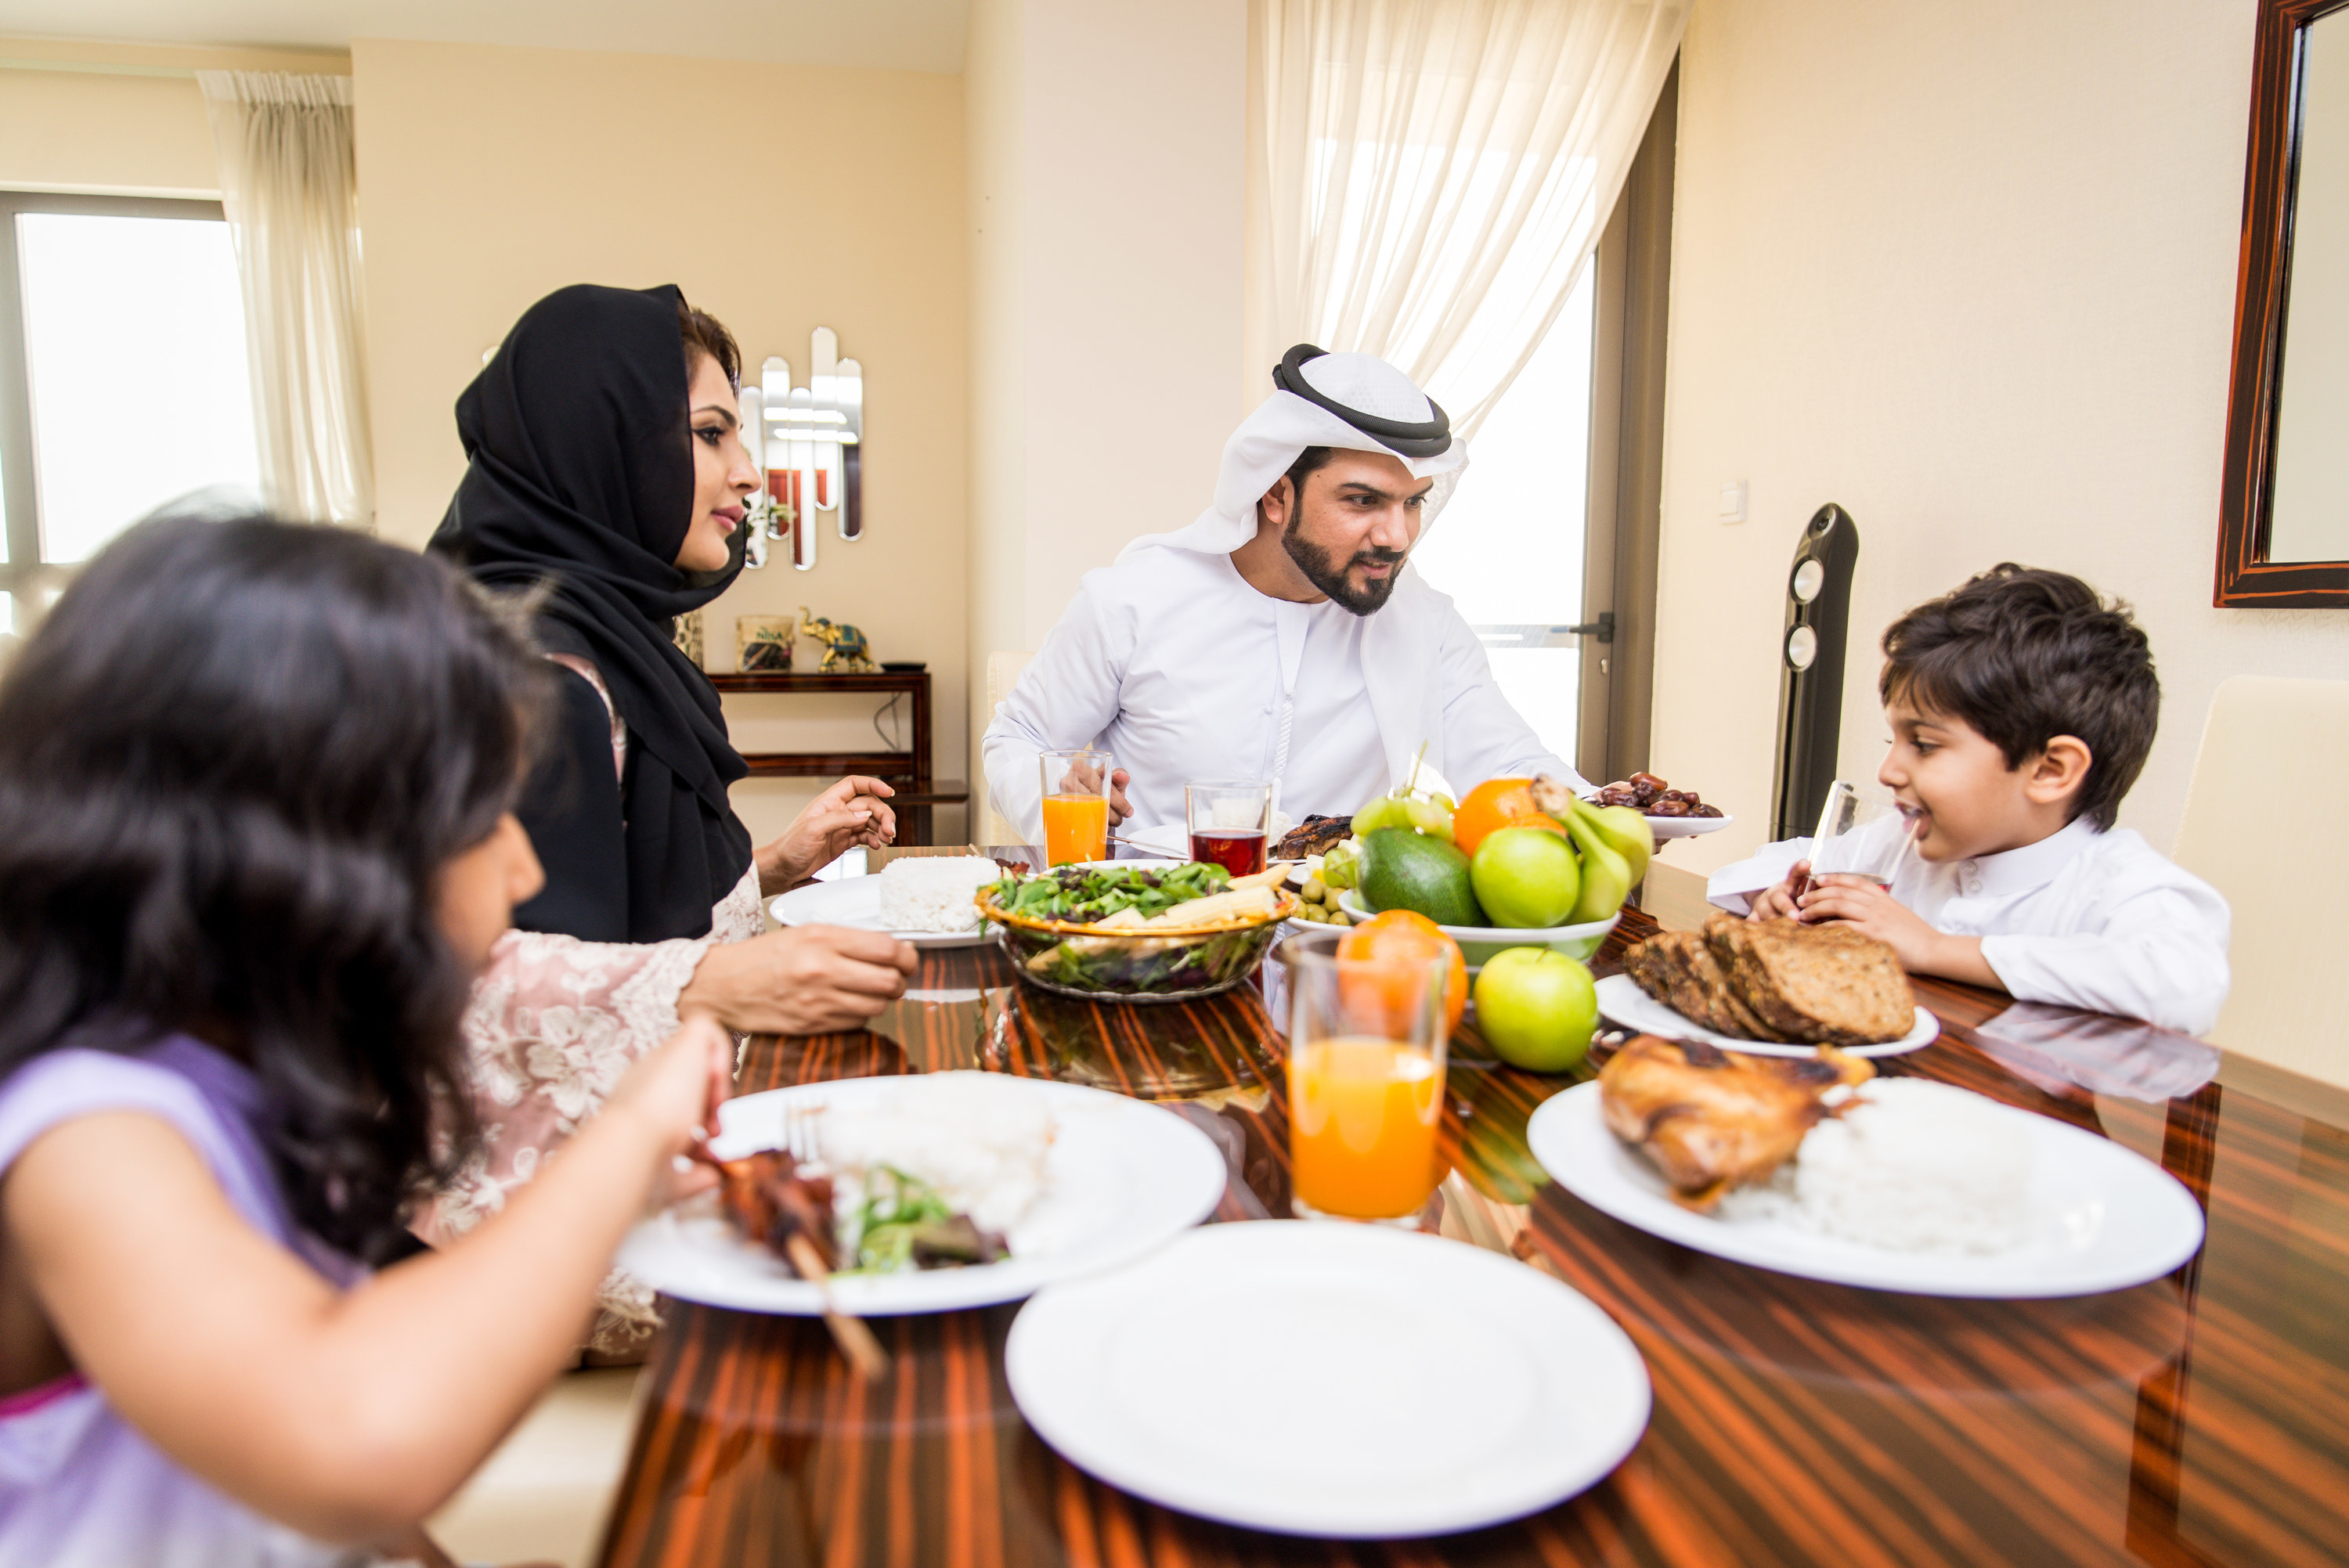 arabic family enjoying dinner together at a rectangular shiny wooden table